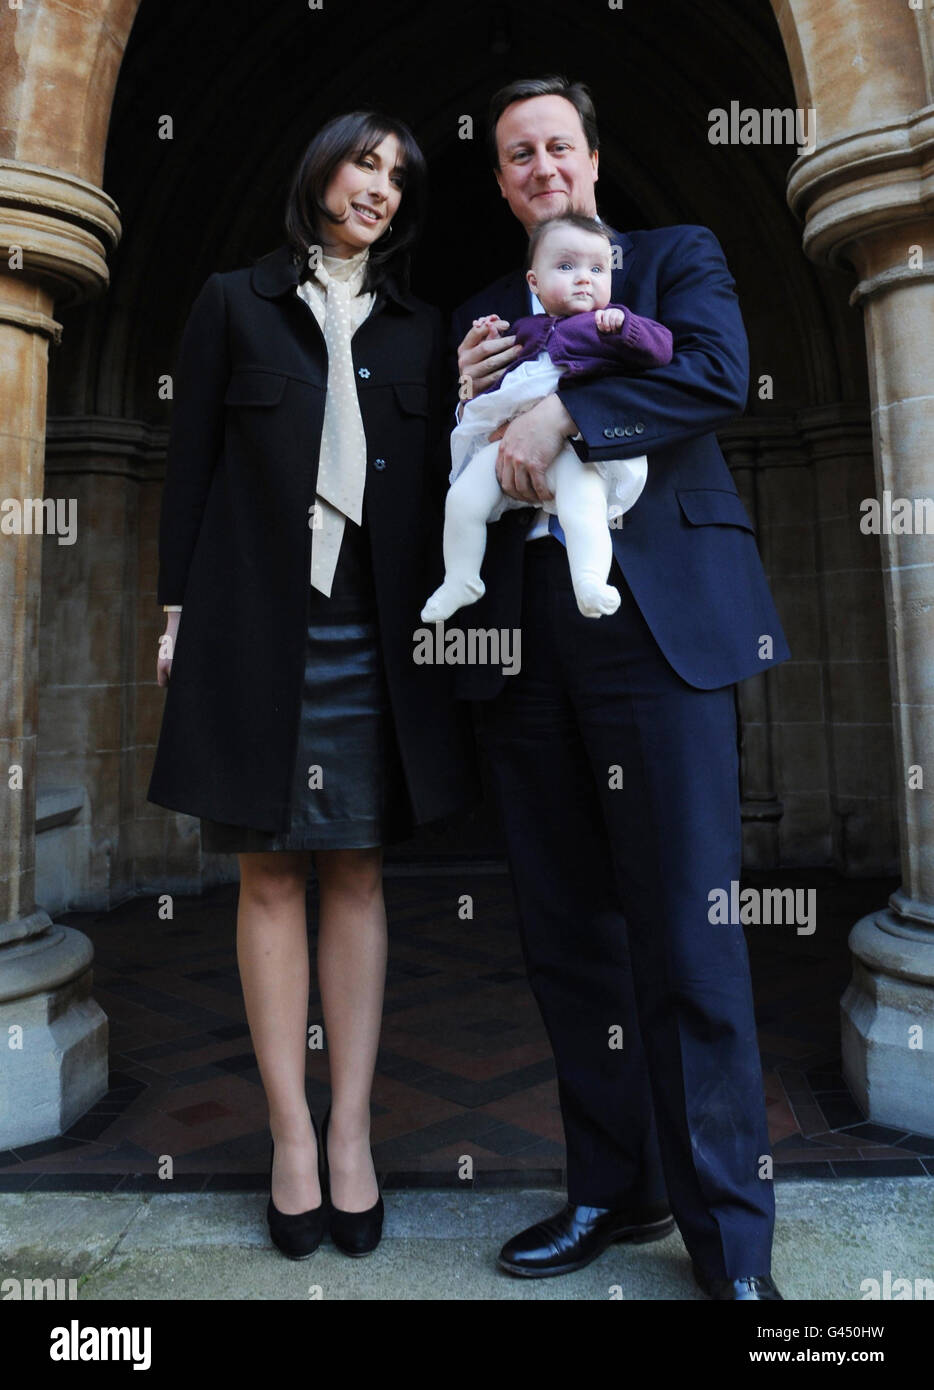 Prime Minister David Cameron and his wife Samantha with their daughter Florence Rose Endellion at St Mary Abbots Church in South Kensington, west London today, after the christening of their youngest child who was born in Cornwall last August. Stock Photo